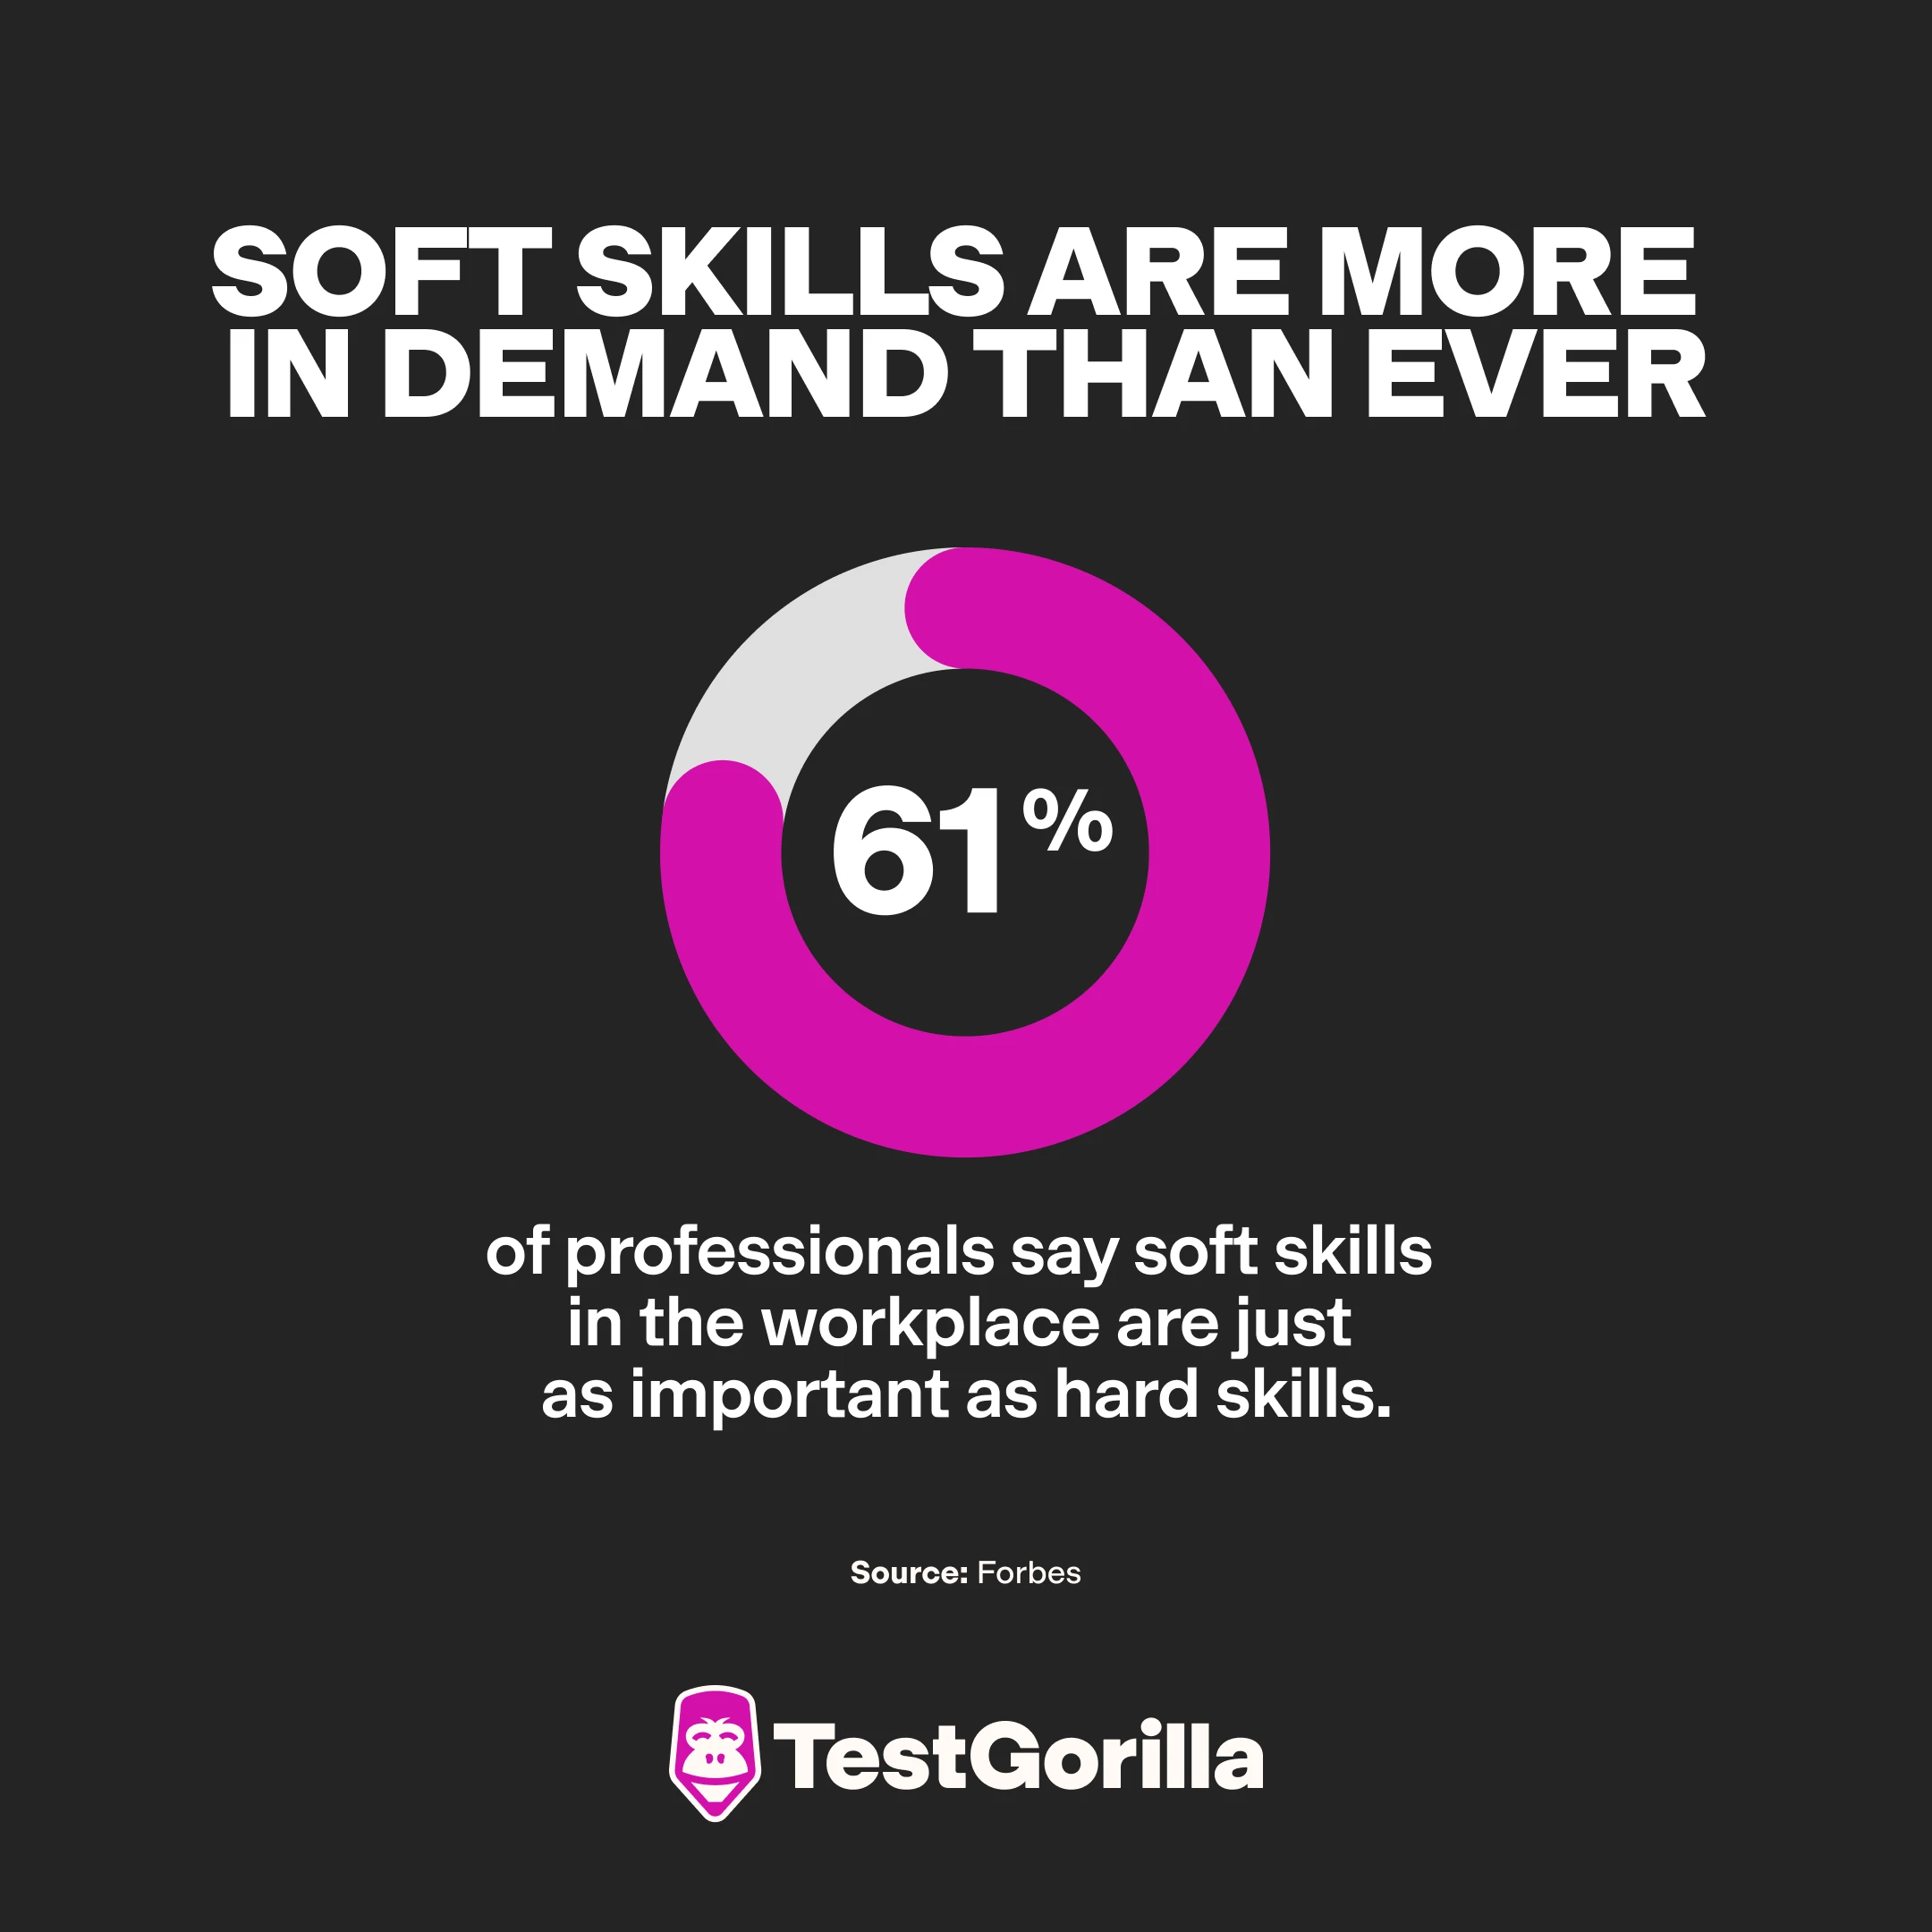 Soft skills are more in demand than ever